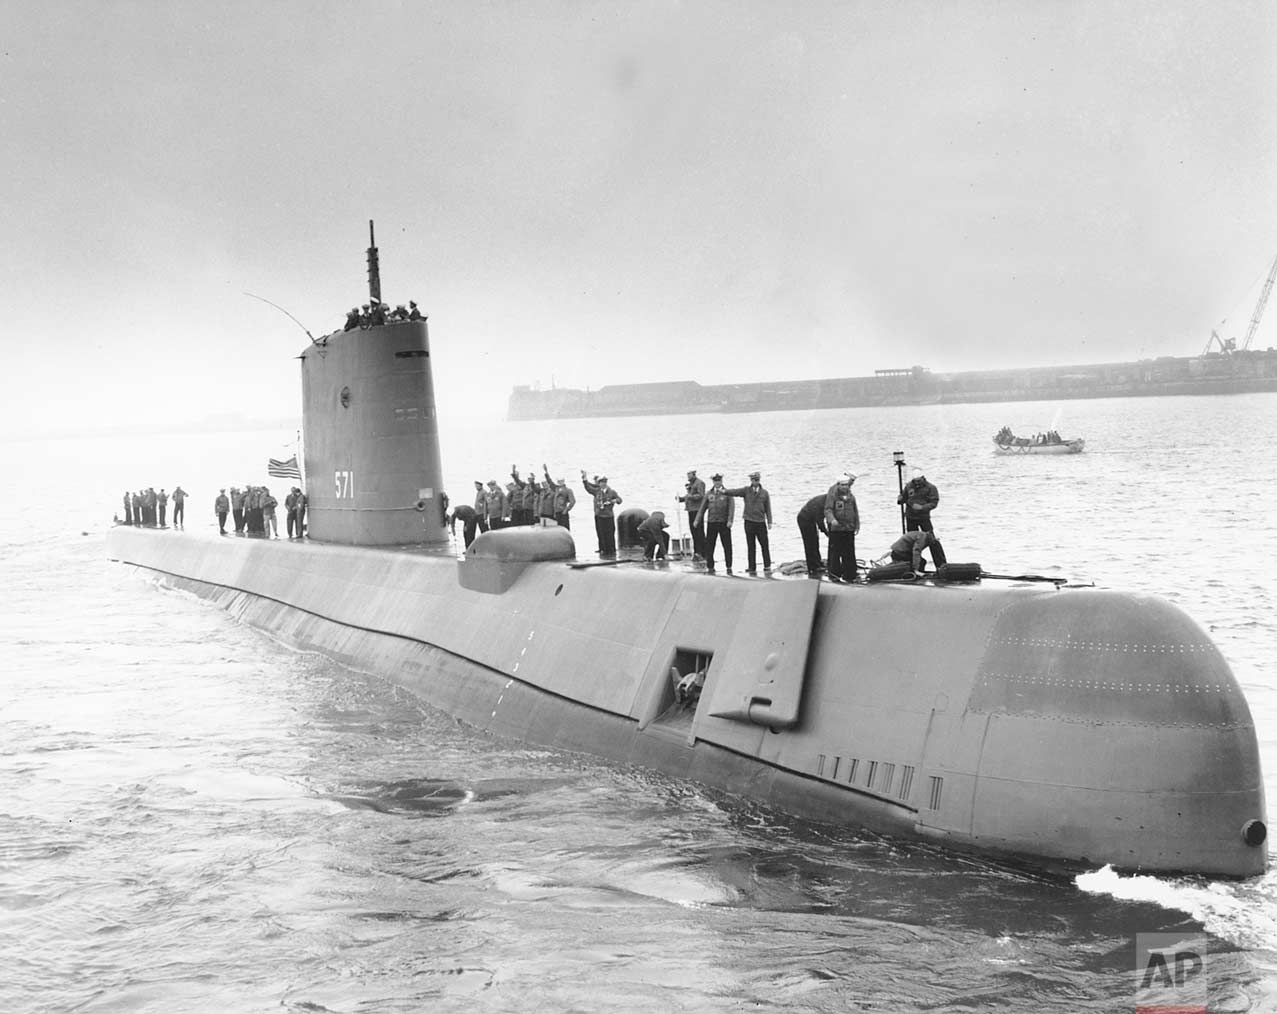 AP Images on Twitter: "OTD in 1958, the nuclear-powered submarine USS Nautilus became the first ...